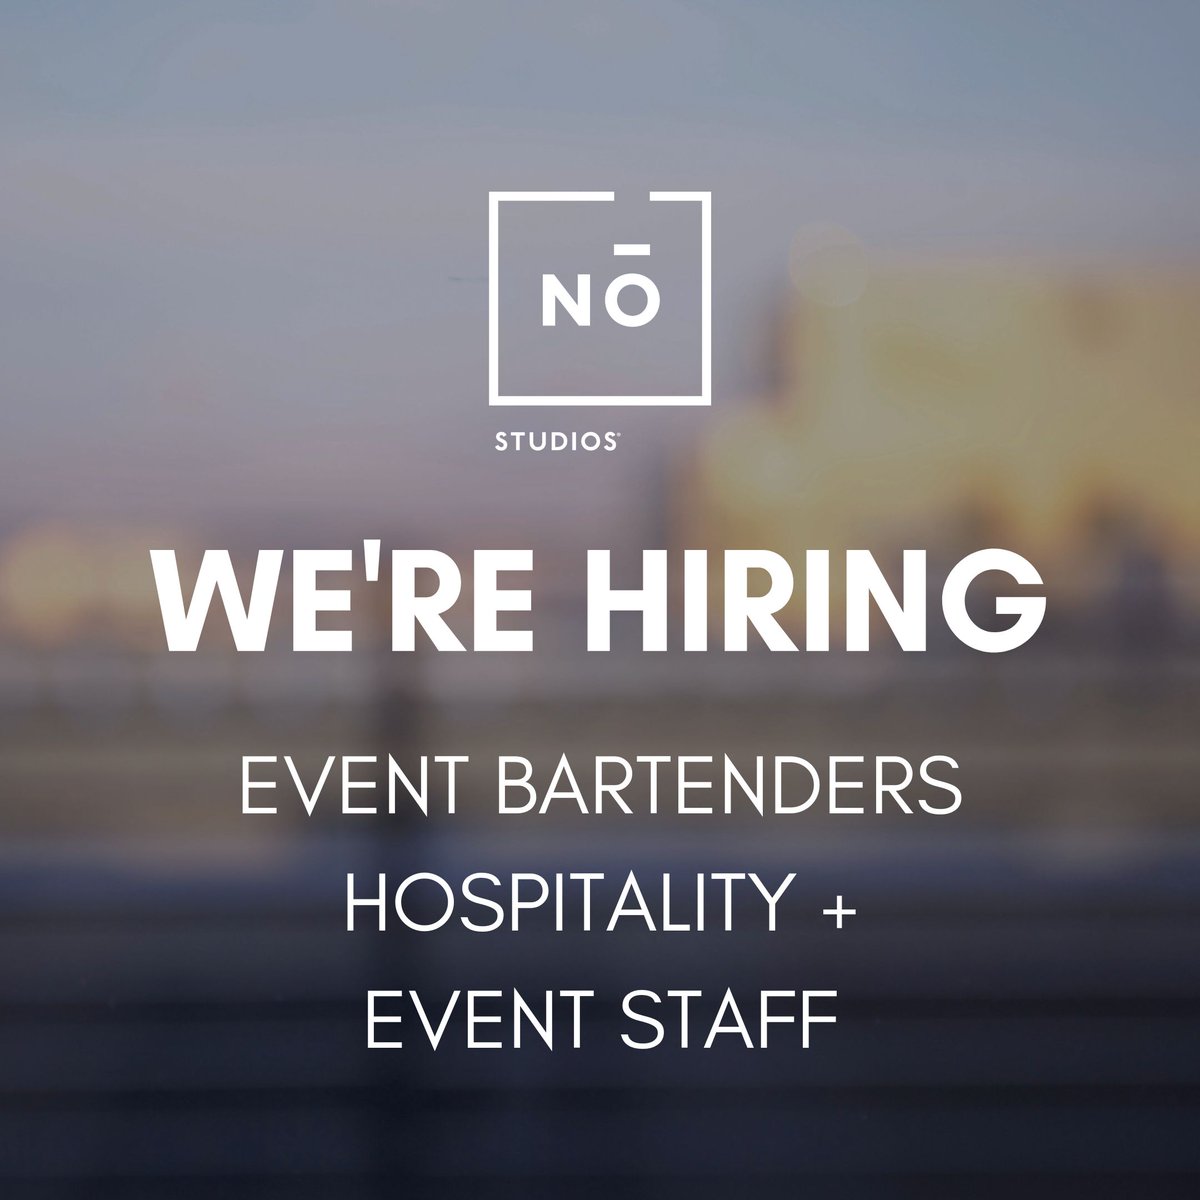 🌟 Join the Nō Studios Team! 🌟 Ready to be part of something extraordinary? We're hiring part-time and event-based roles - Bartenders, Hospitality, and Event Crew. Competitive pay and awesome member perks for all employees. Apply at nostudios.com/apply and let's create magic